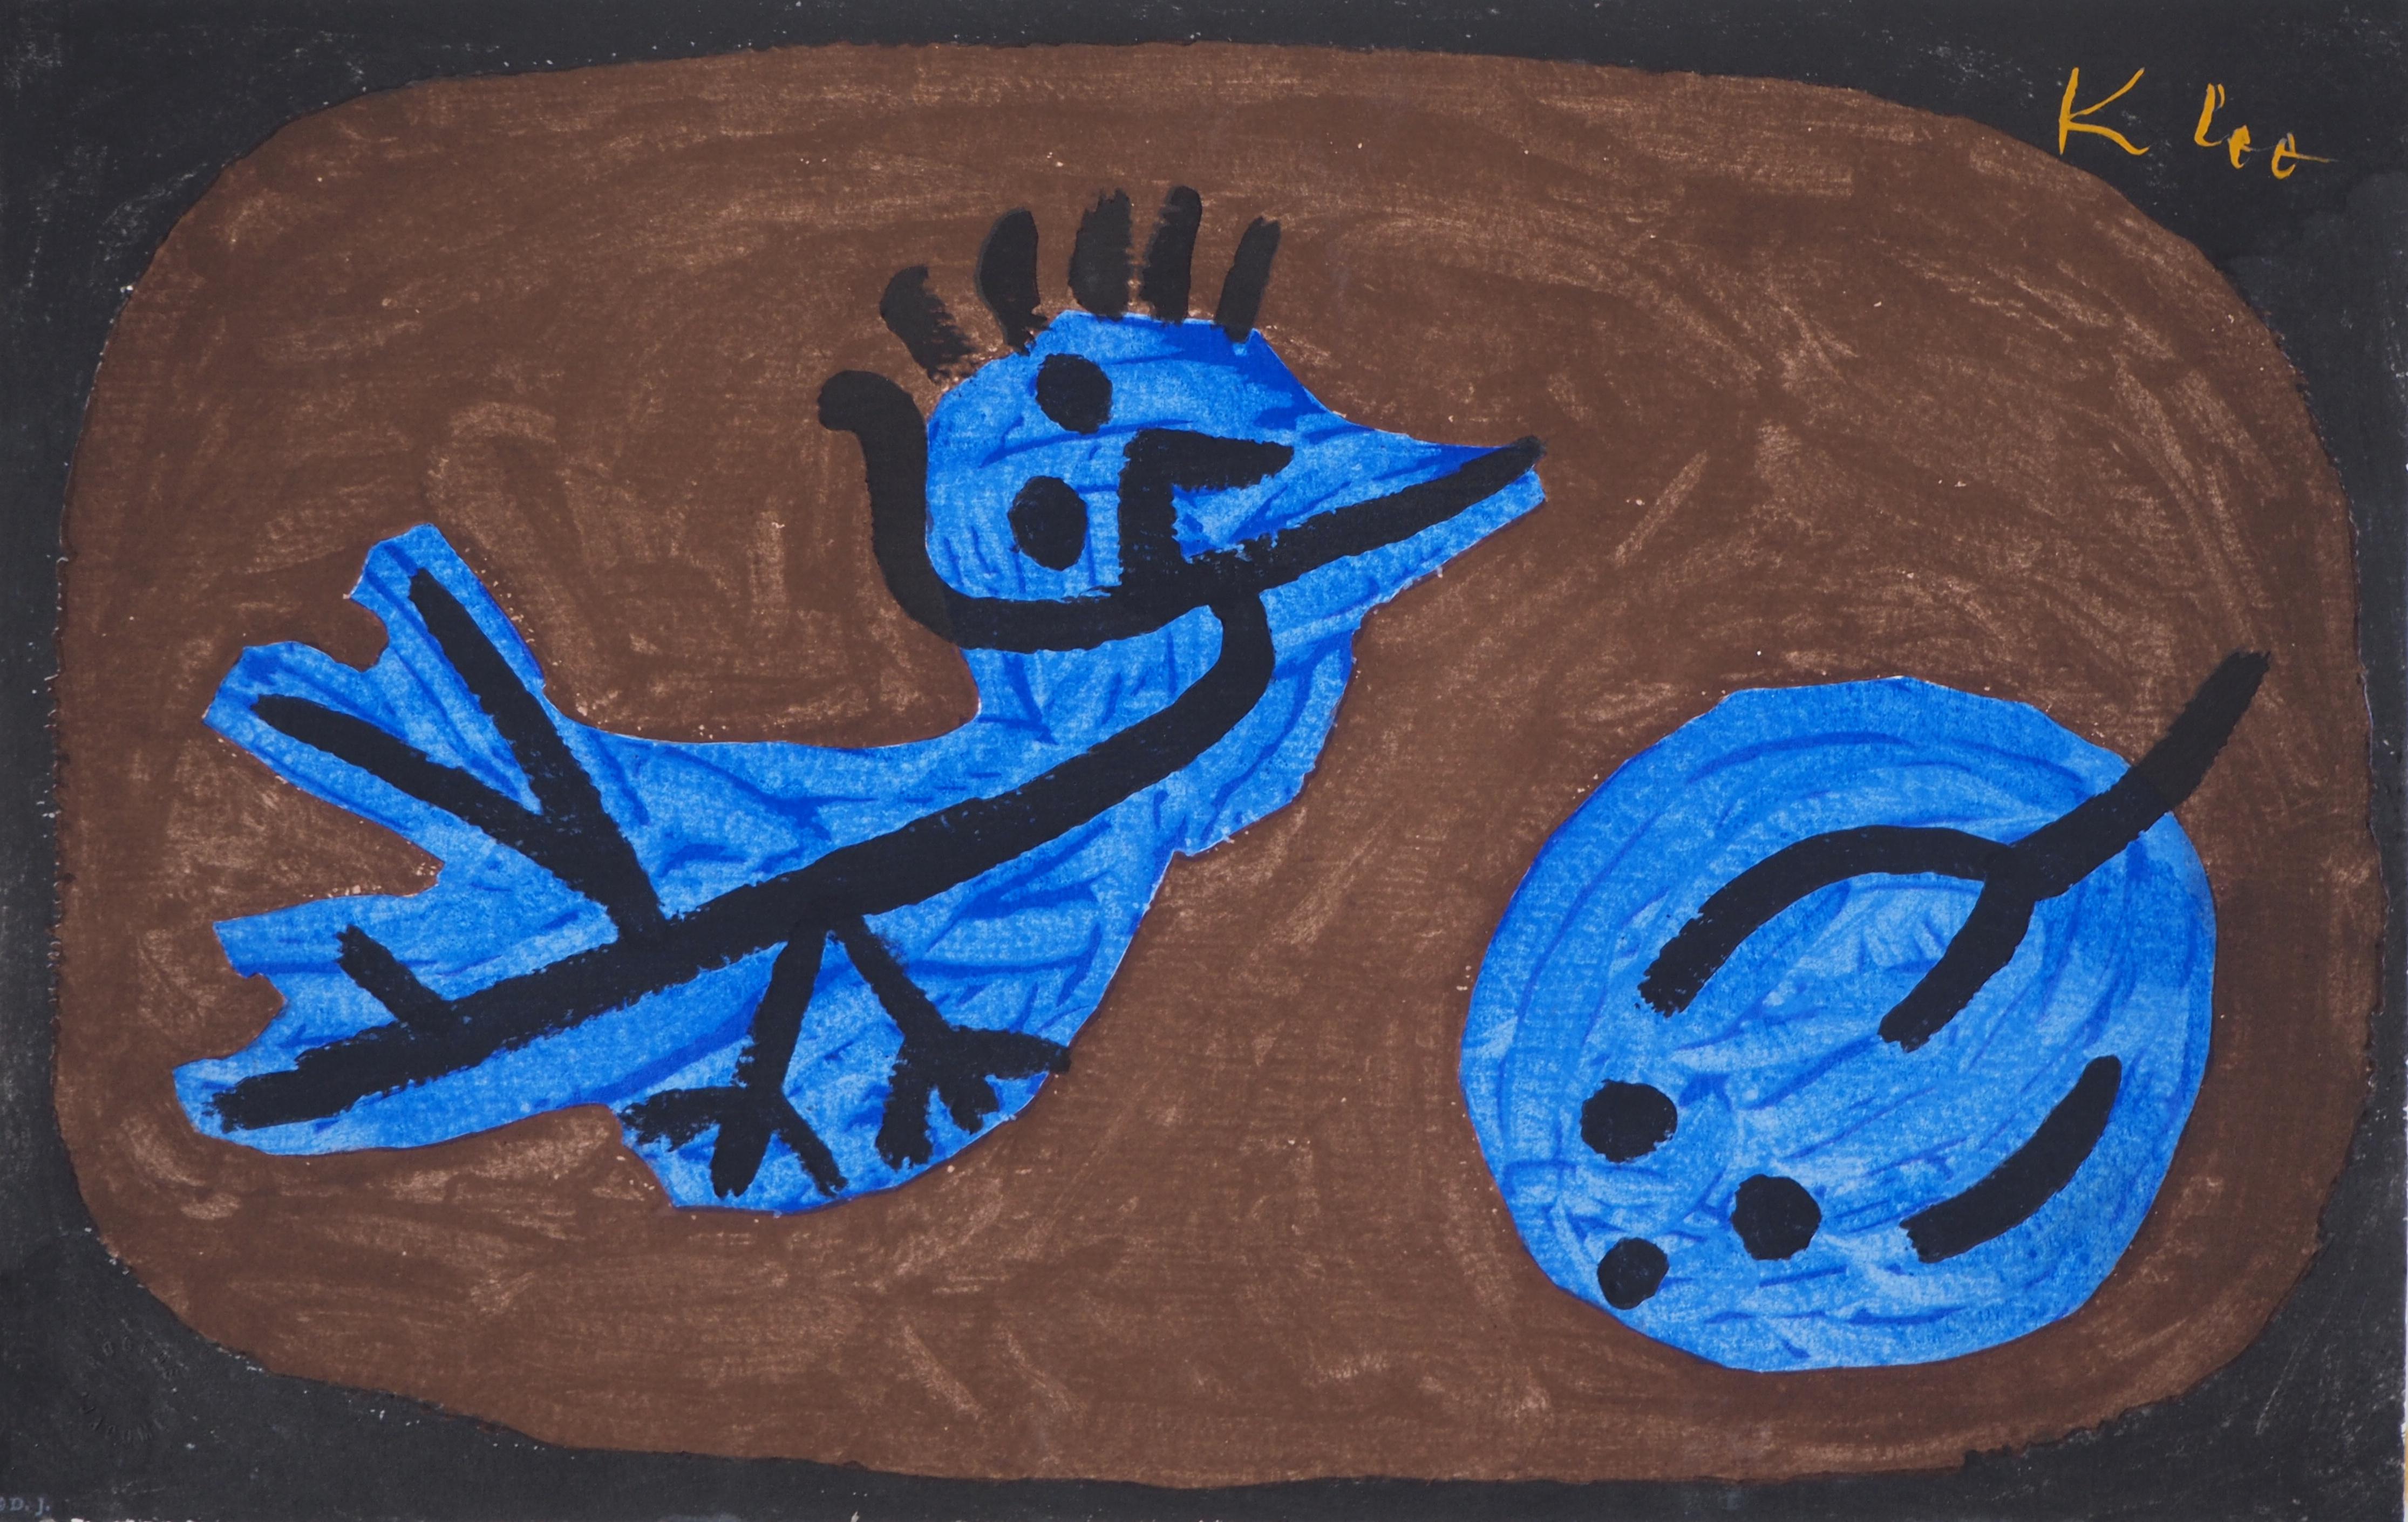 (after) Paul Klee Animal Print - Blue, Bird, Squash - Lithograph and Stencil